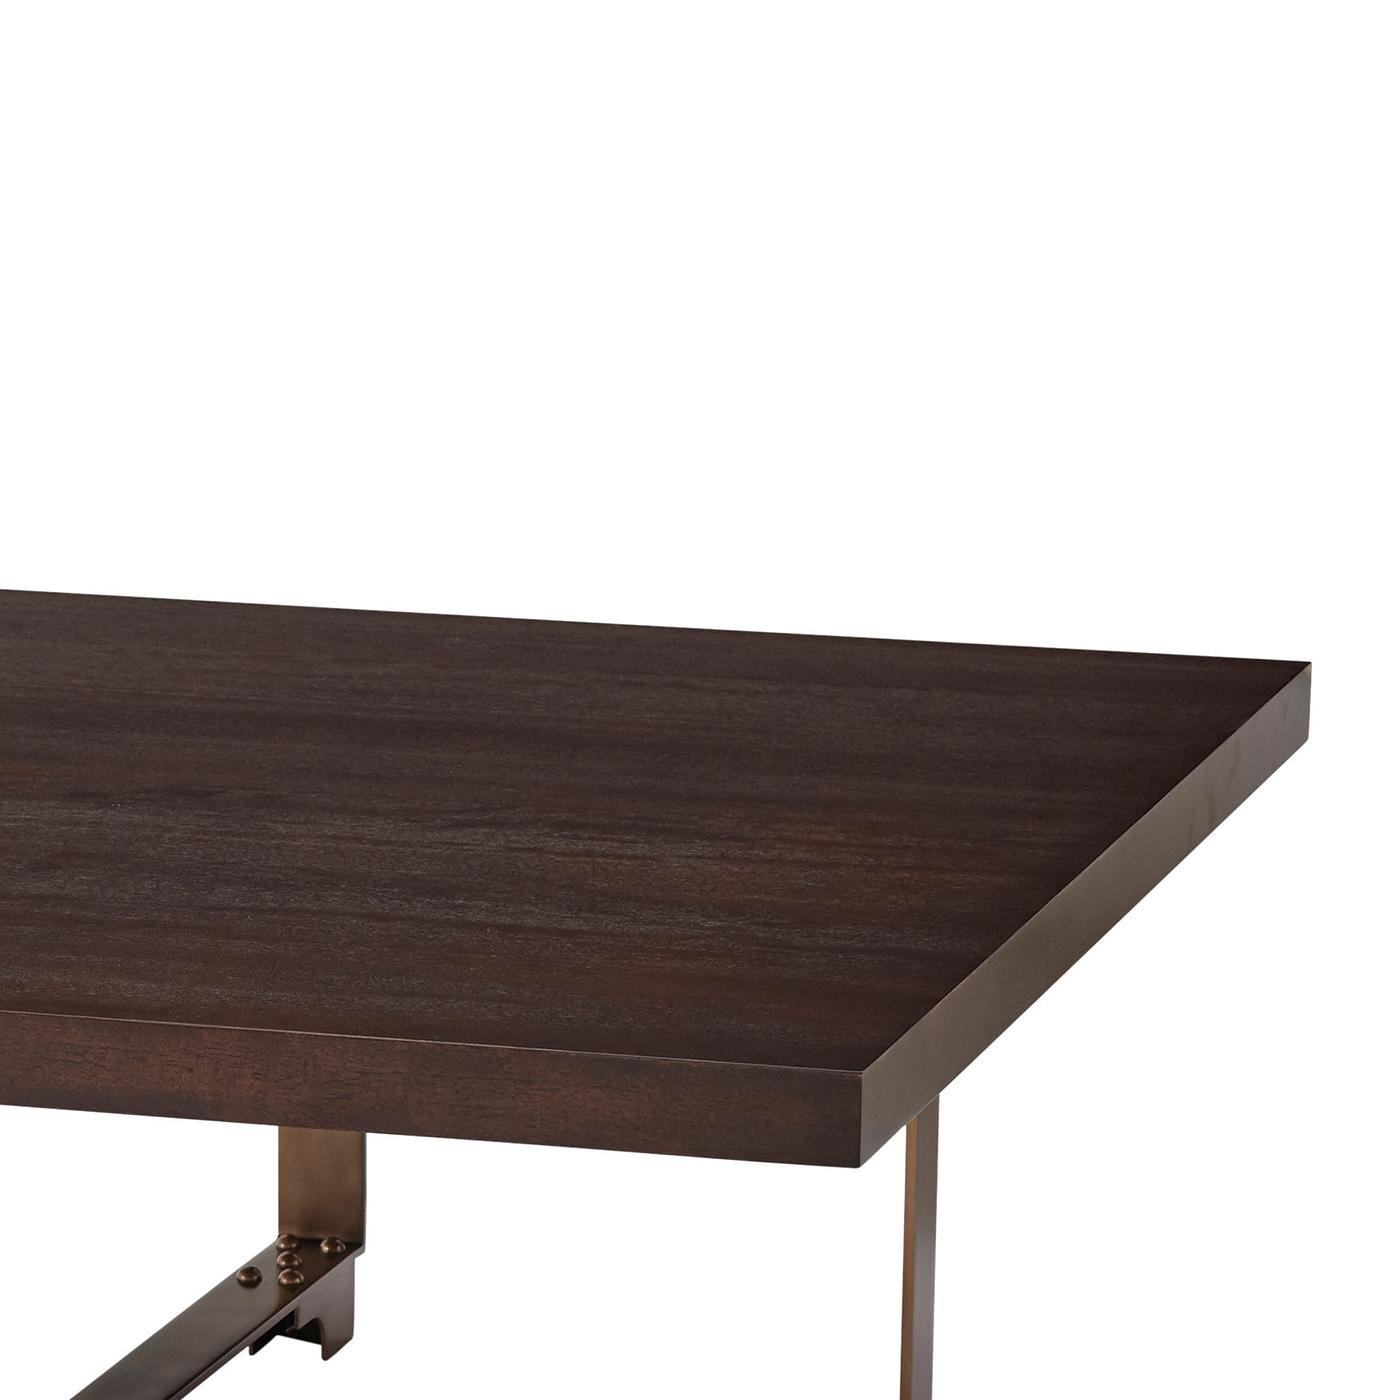 Modern industrial square cocktail table with a mahogany veneered square top, the base, a studded steel monolith bound by bracket supports.

Dimensions: 48